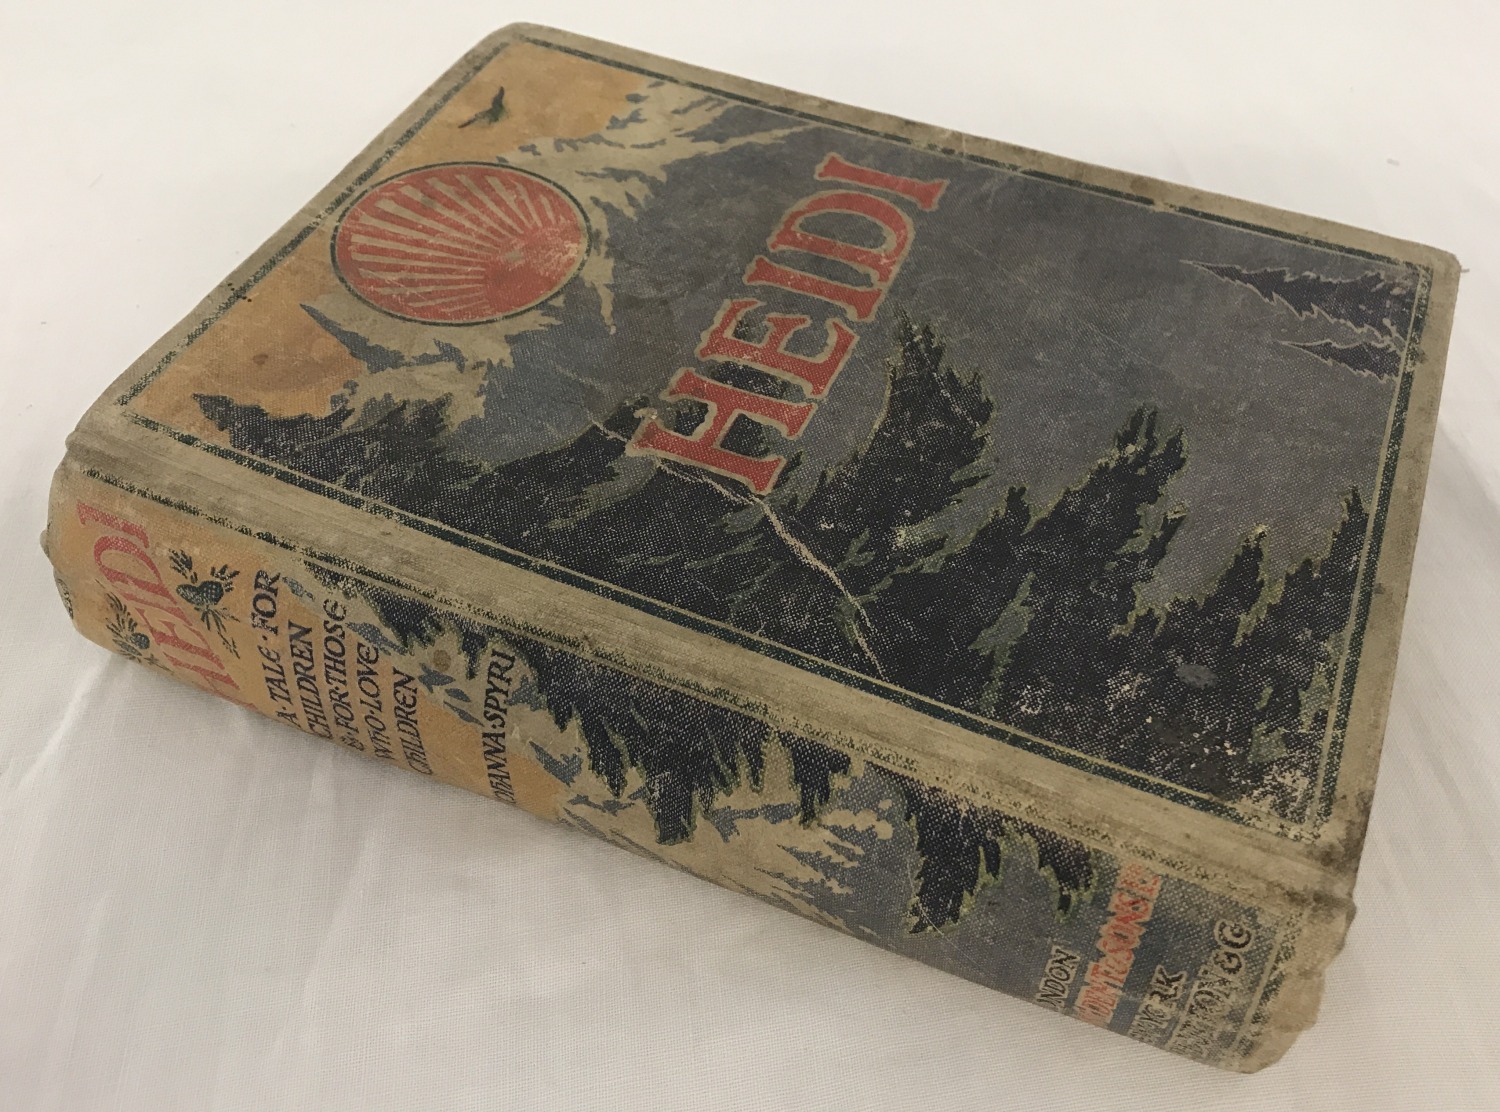 Heidi, first Edition by Johanna Spyri, published by J.M.Dent & sons, illustrated by Lizzie Lawson.